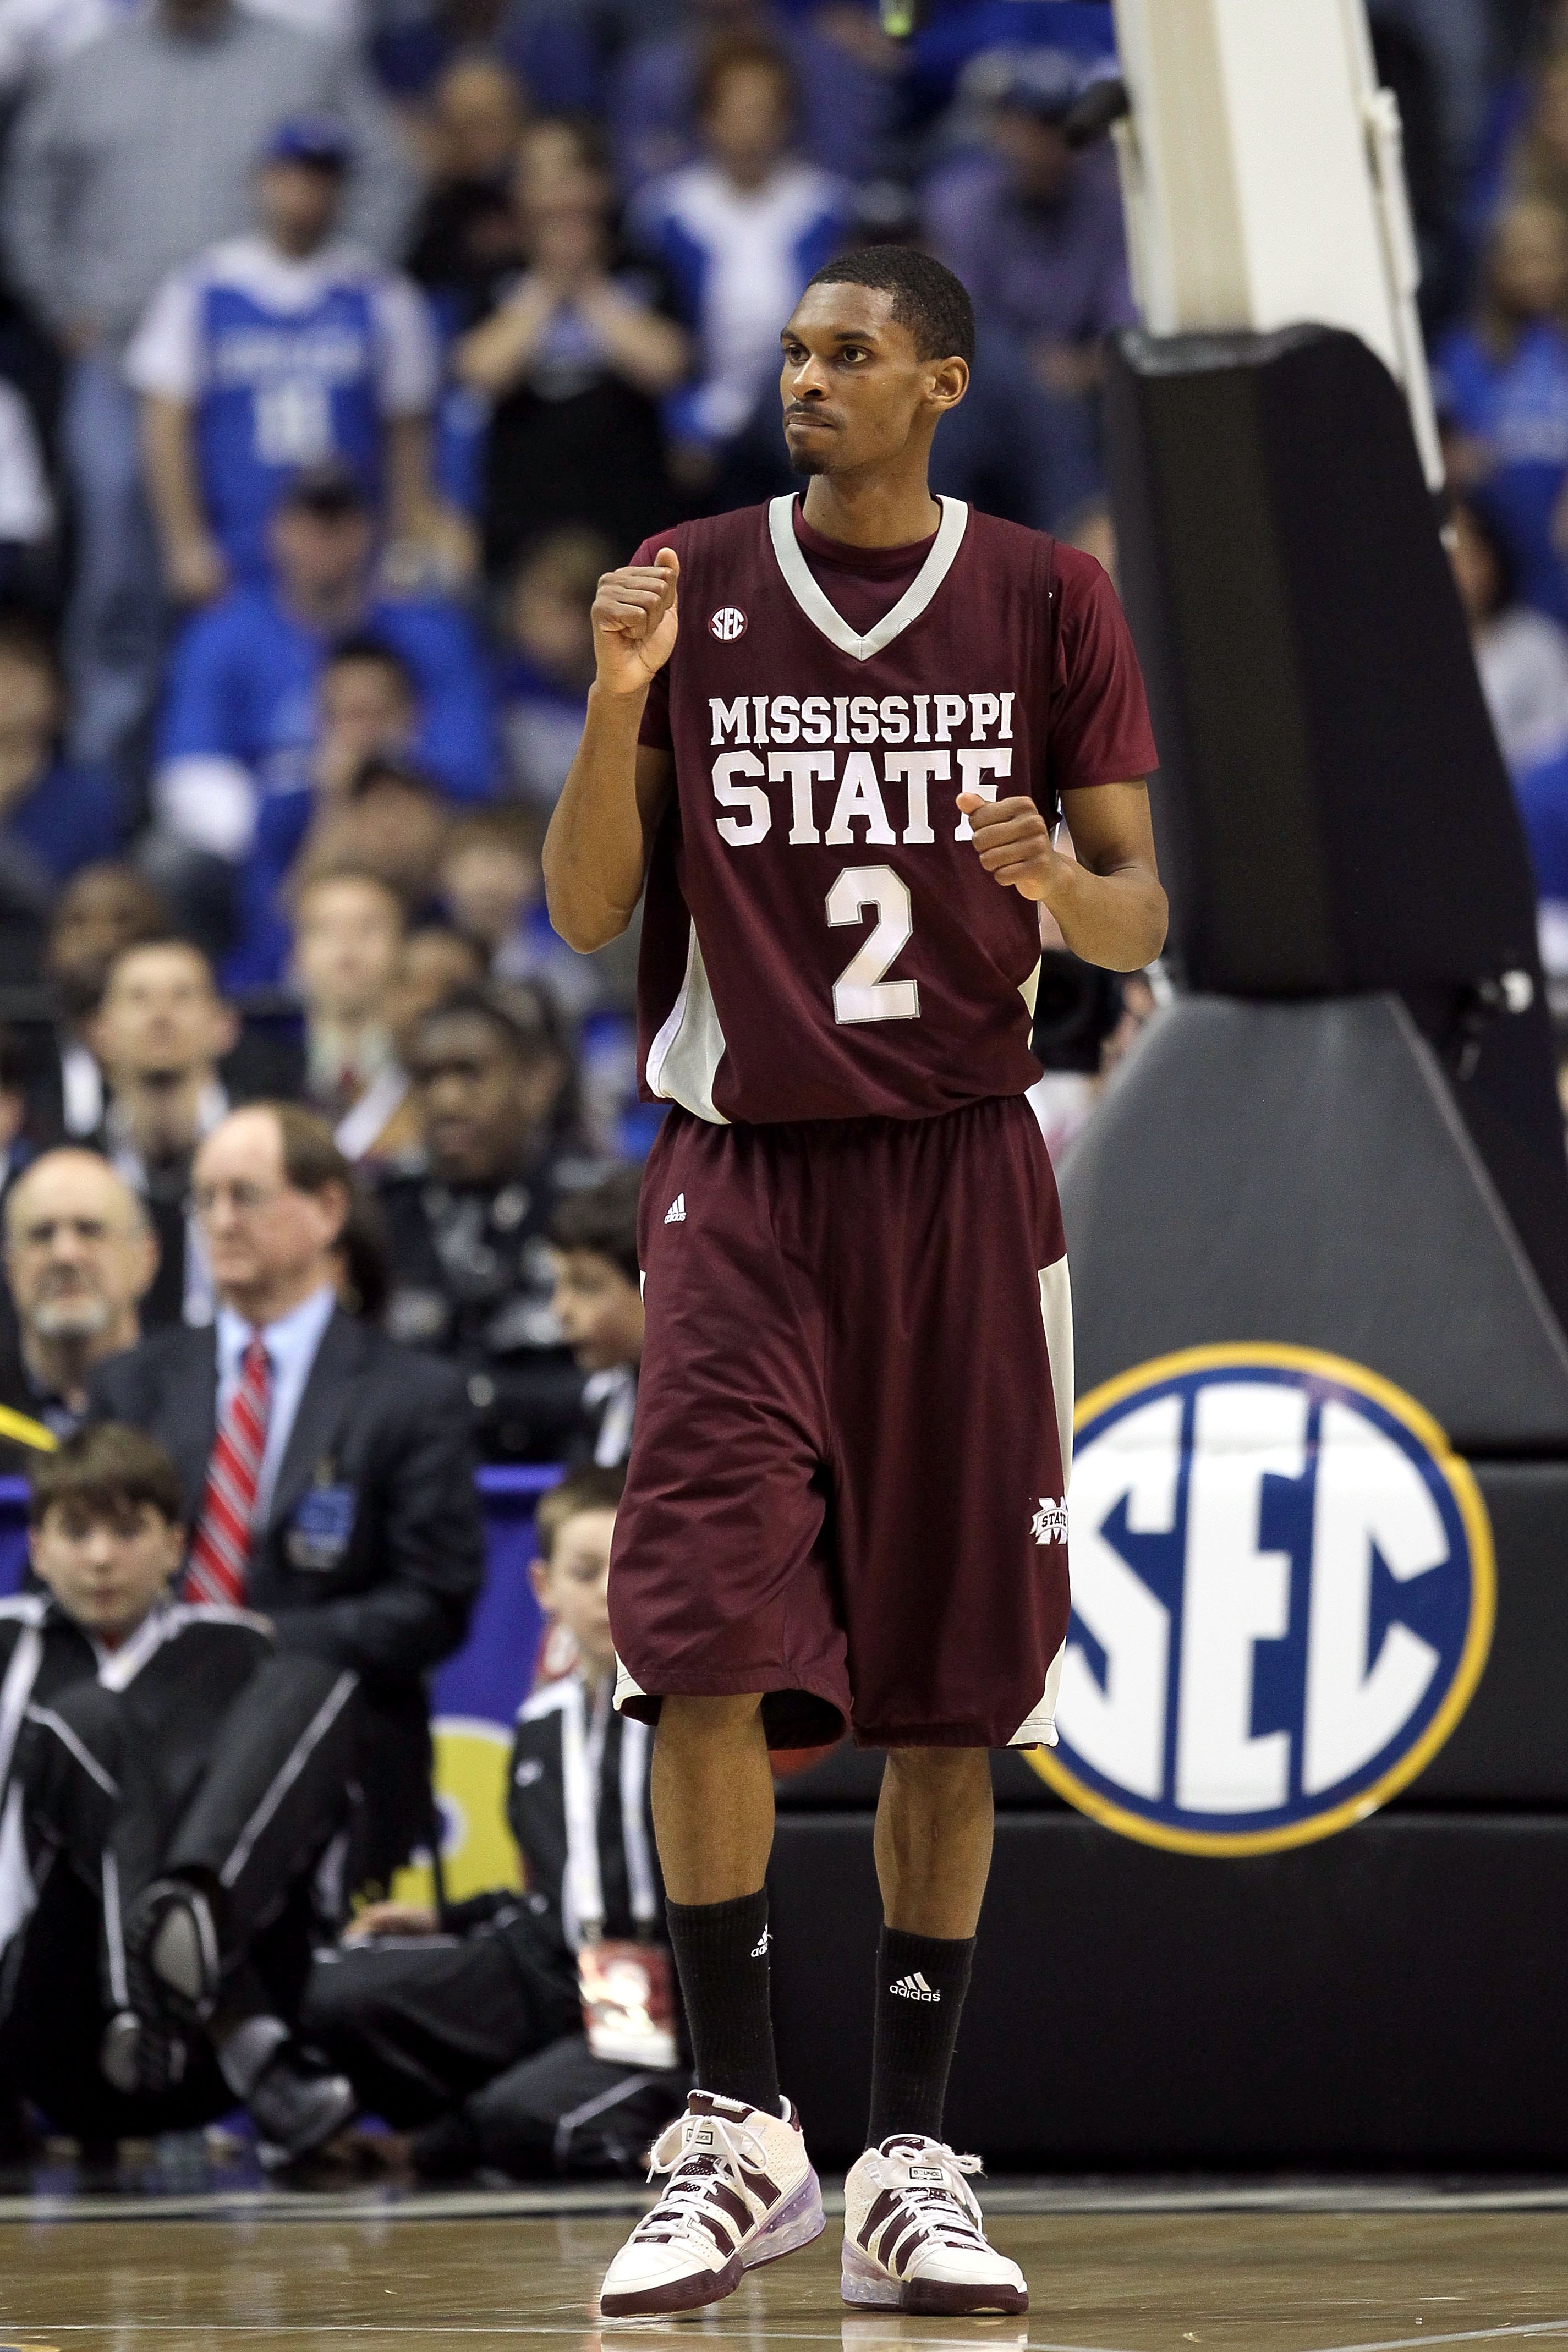 NASHVILLE, TN - MARCH 14:  Ravern Johnson #2 of the Mississippi State Bulldogs reacts against the Kentucky Wildcats during the final of the SEC Men's Basketball Tournament at the Bridgestone Arena on March 14, 2010 in Nashville, Tennessee. Kentucky won 75